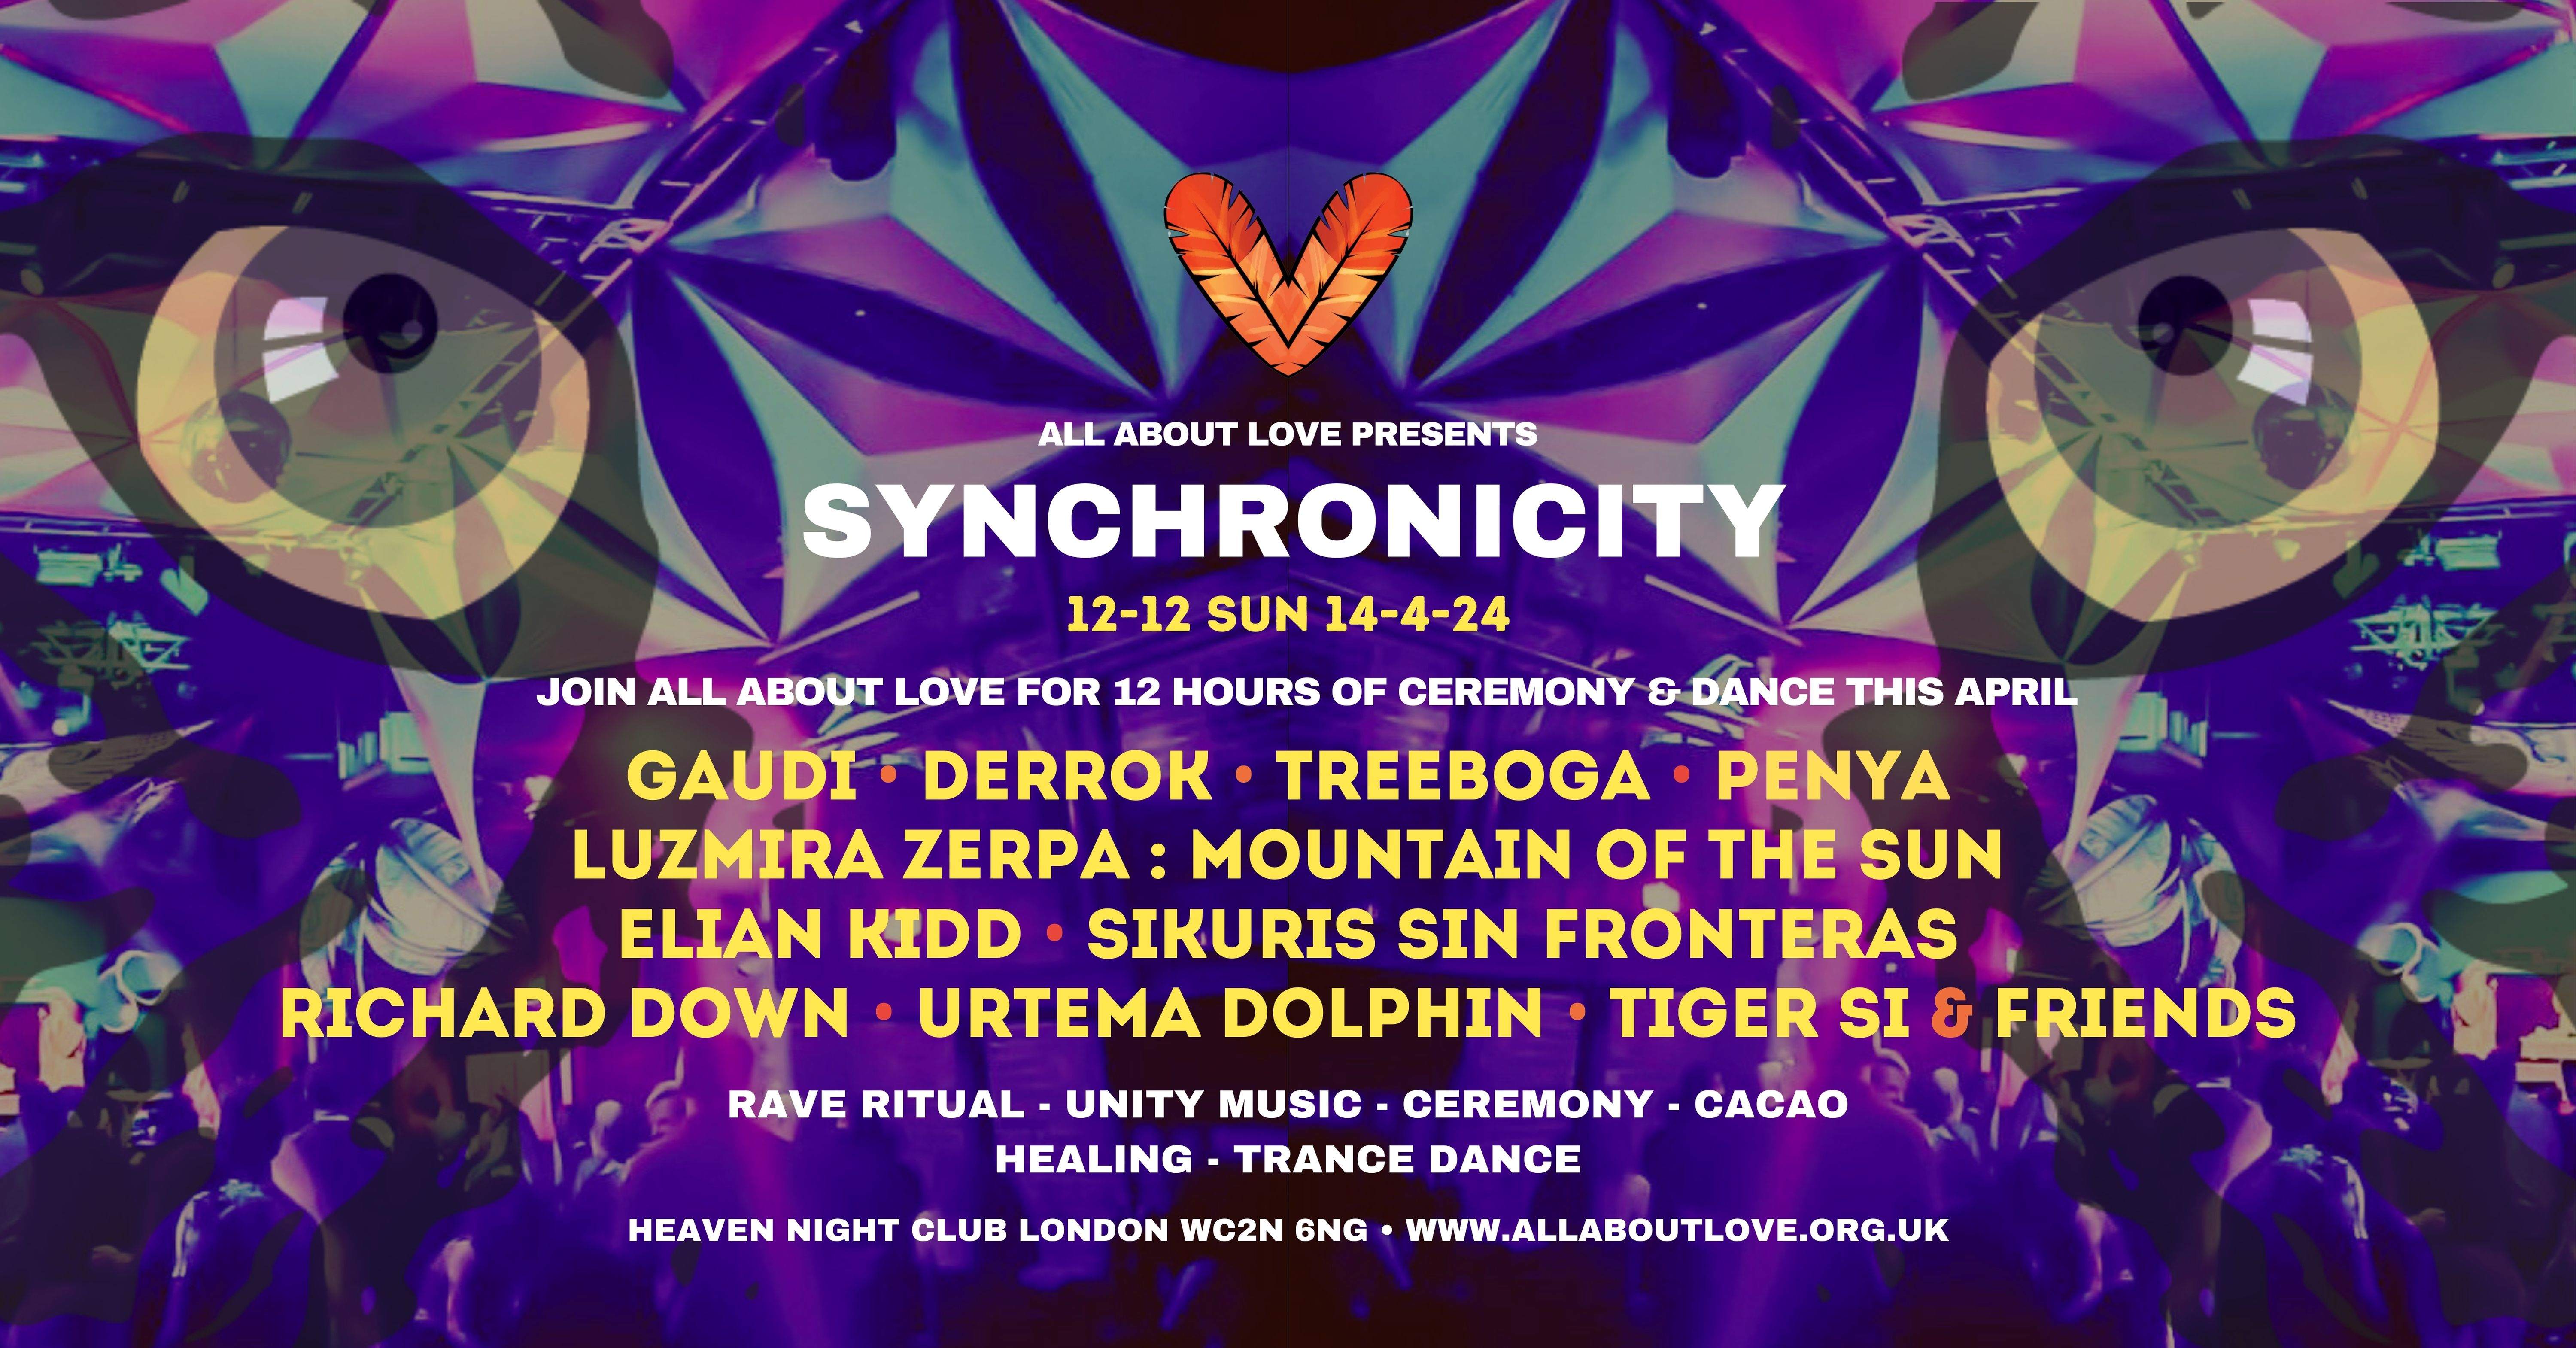 All About Love presents Synchronicity 'Rave Ritual' - Página frontal